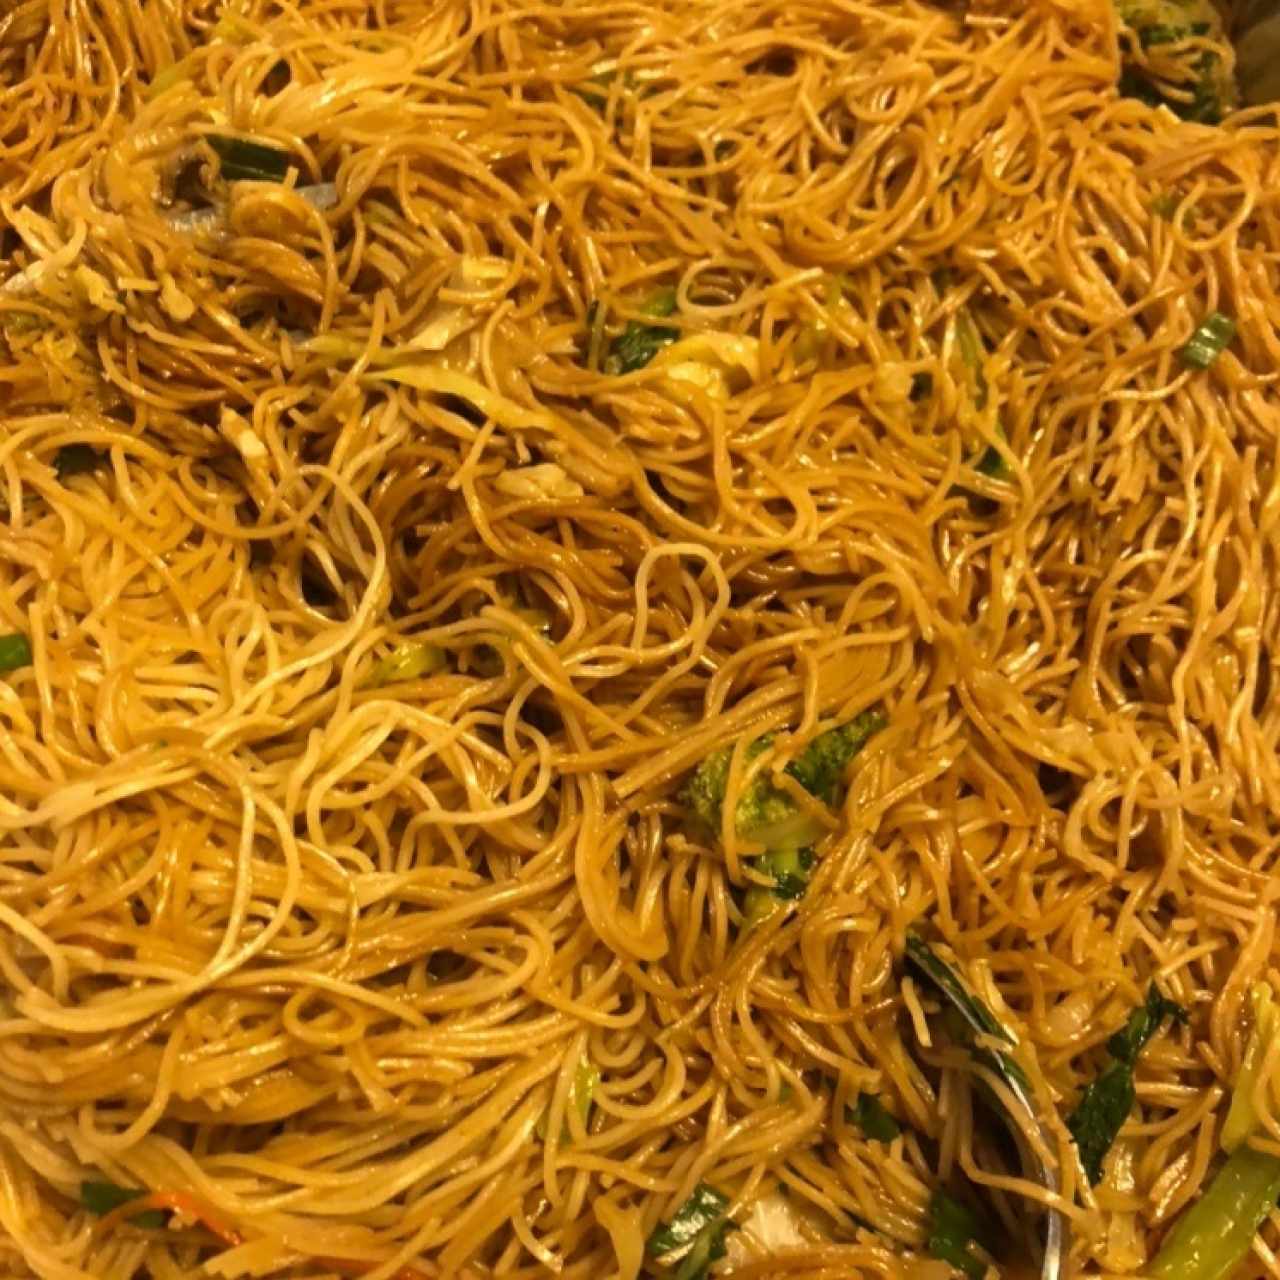 Chow mien